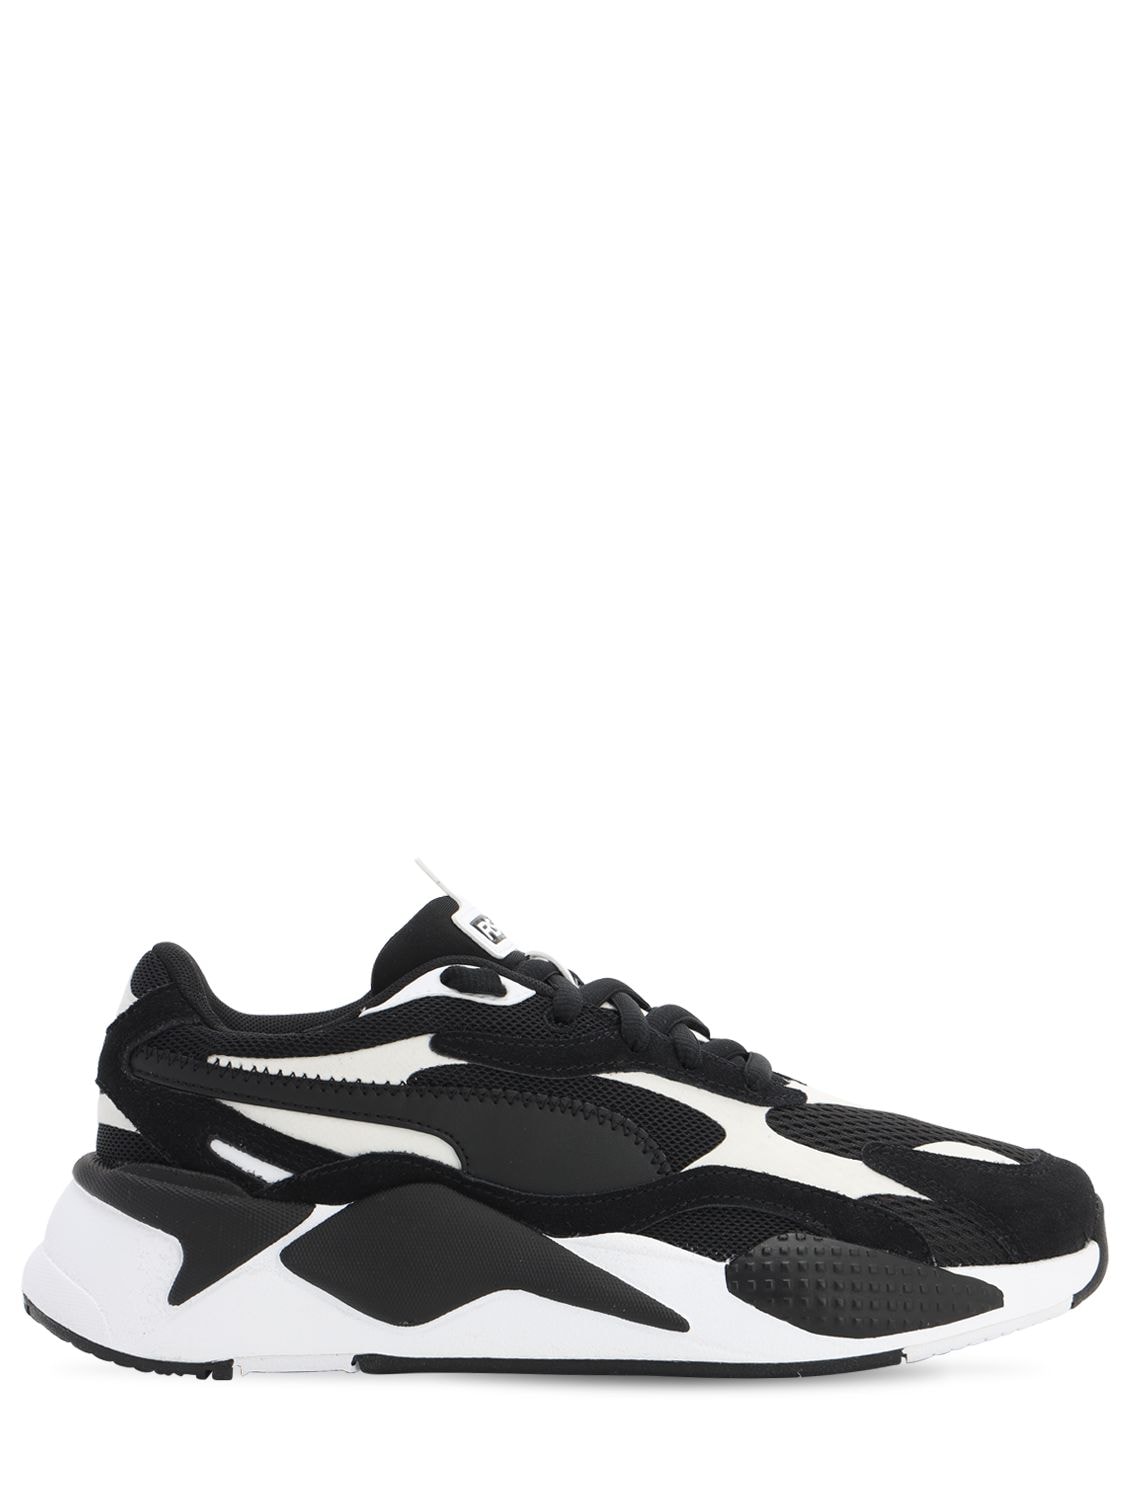 black and white leather pumas